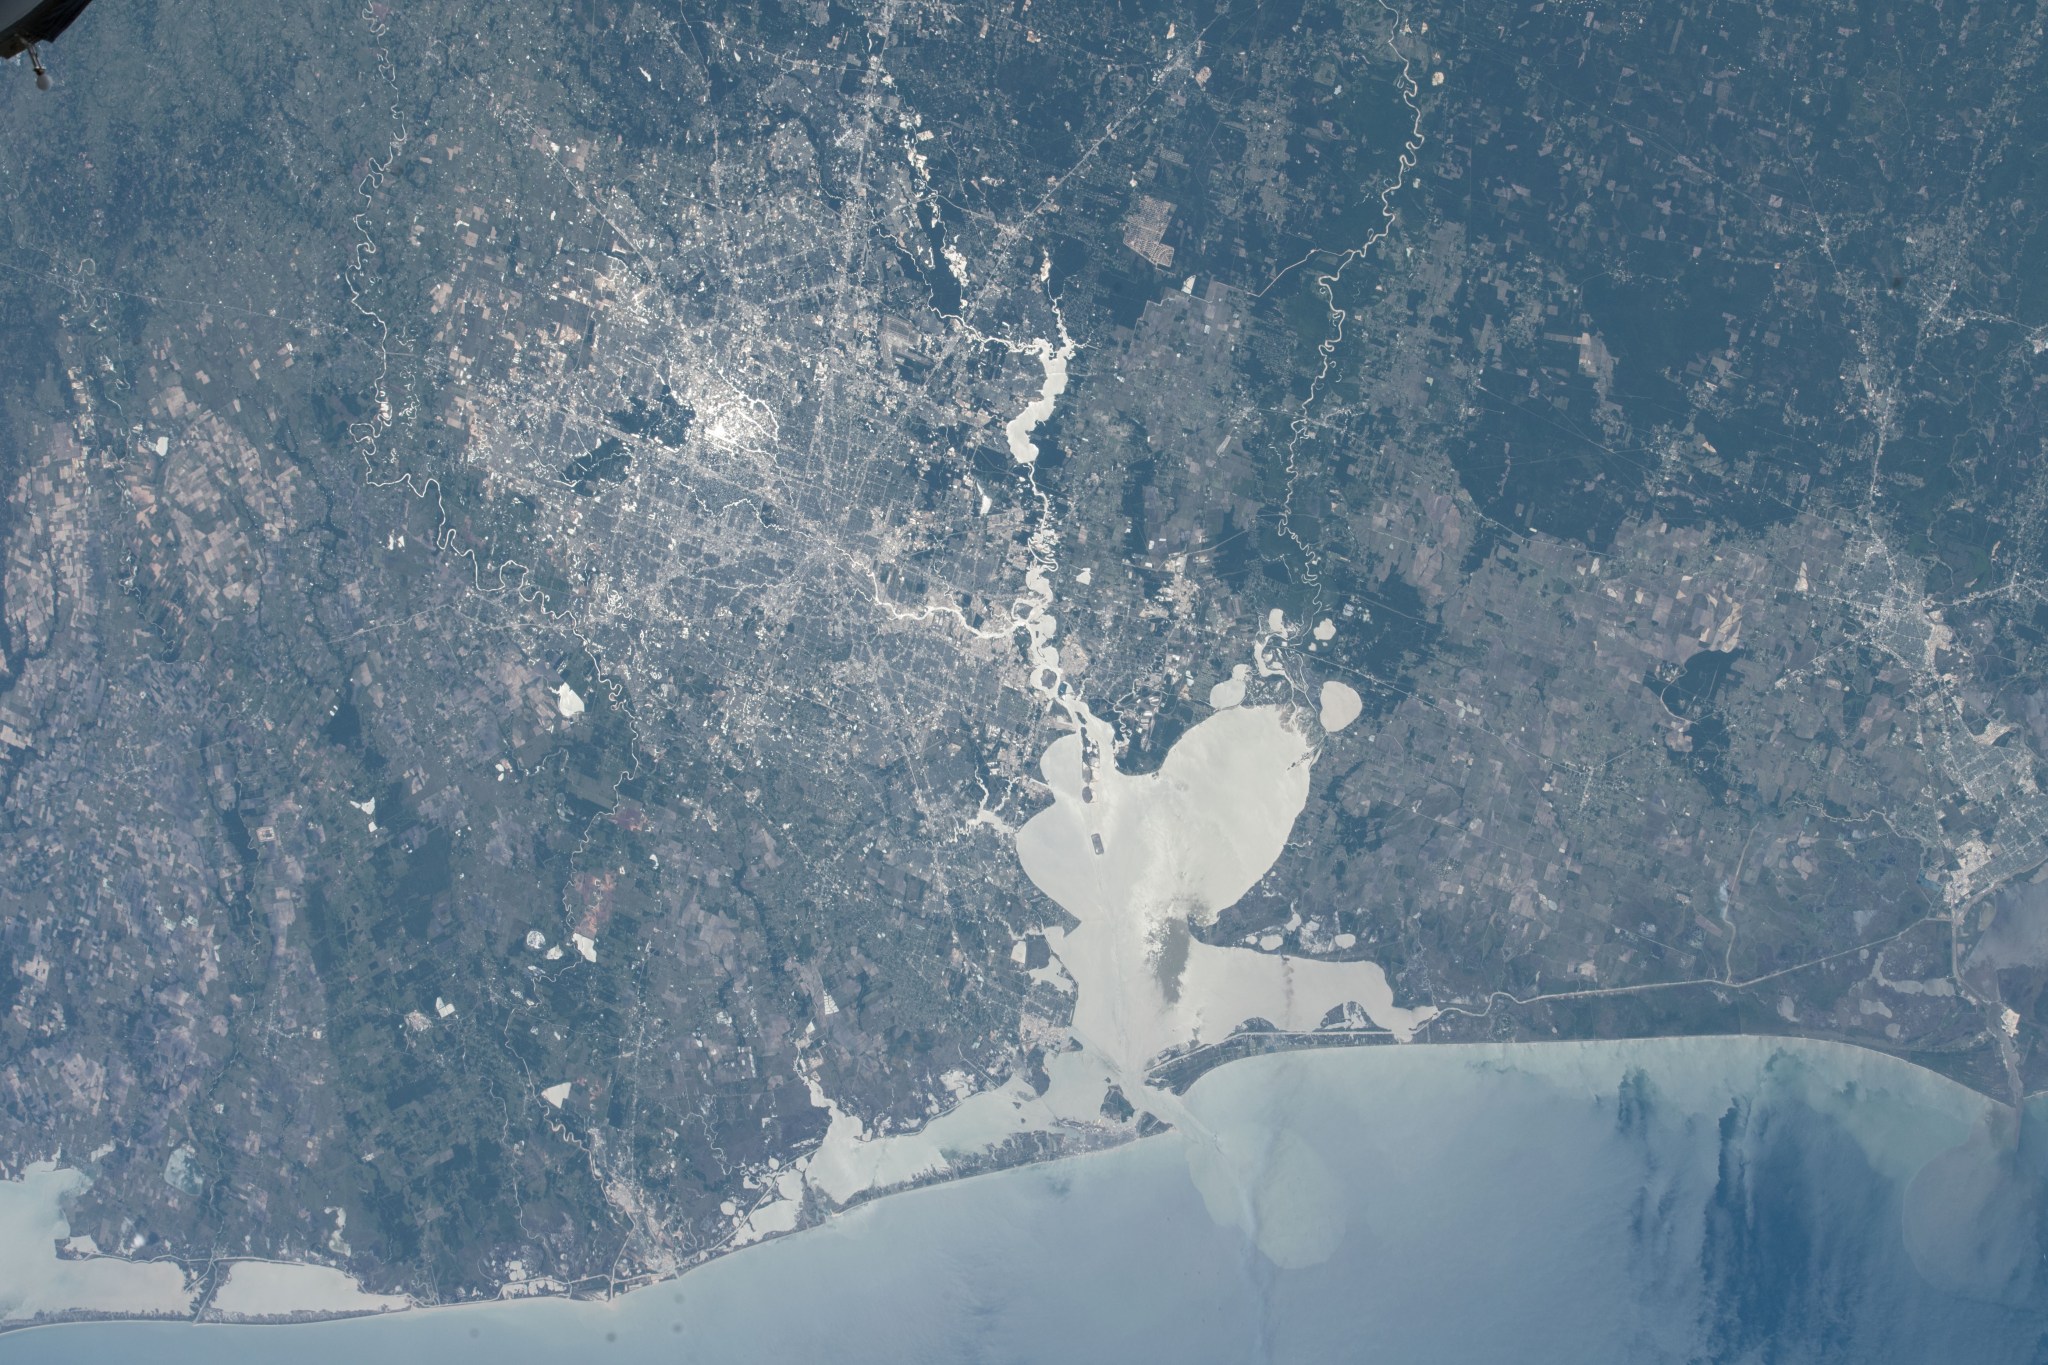 Houston, Texas, the home of NASA's Johnson Space Center, and Galveston Bay are pictured from the space station at an altitude of about 250 miles.